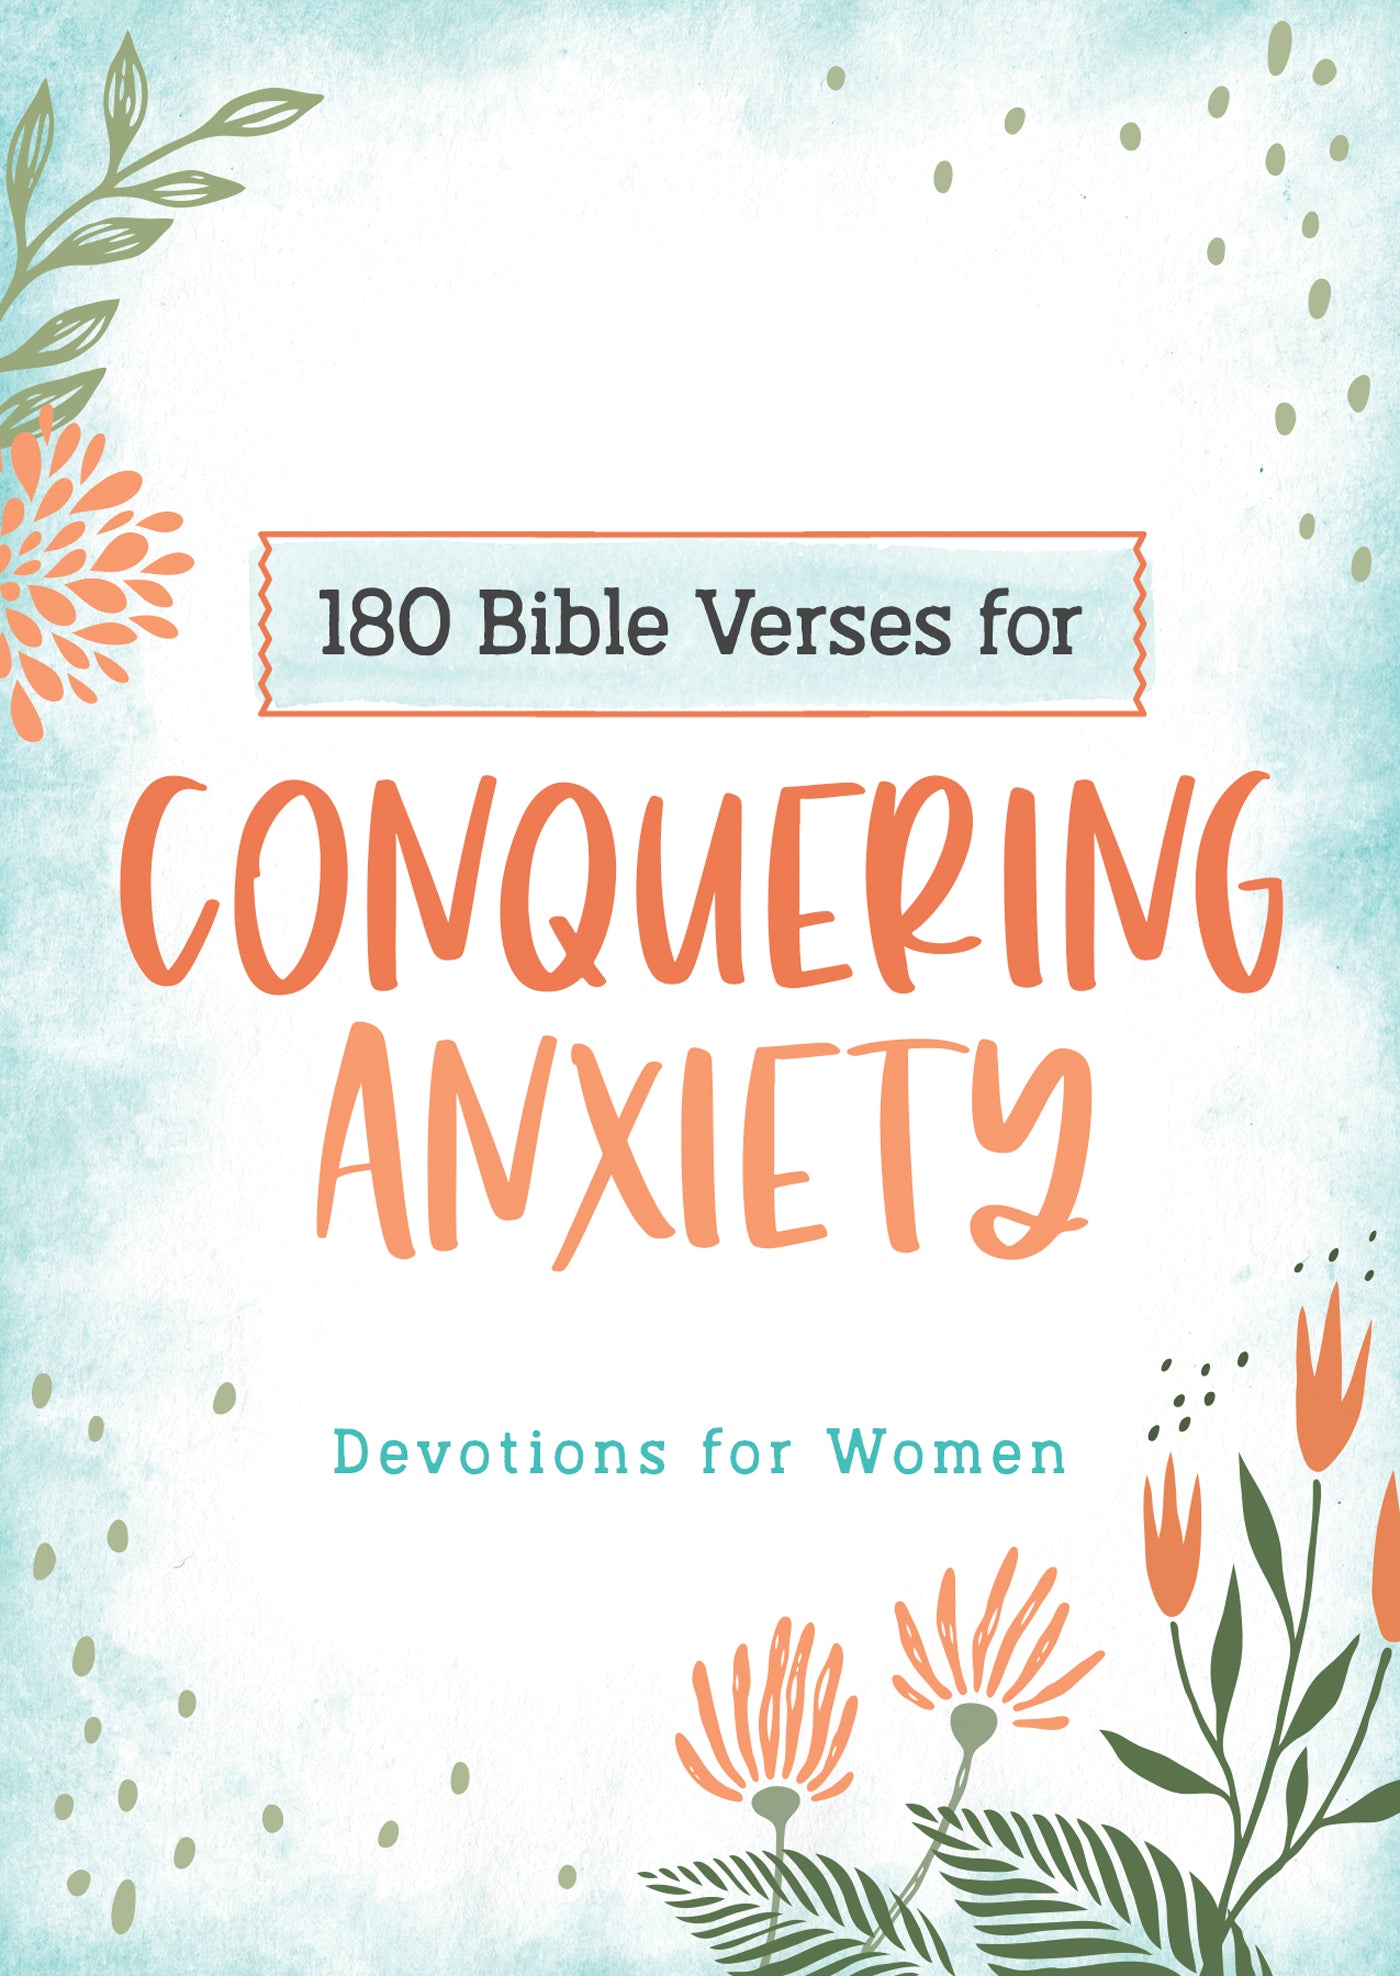 180 Bible Verses for Conquering Anxiety : Devotions for Women - Mercantile Mountain